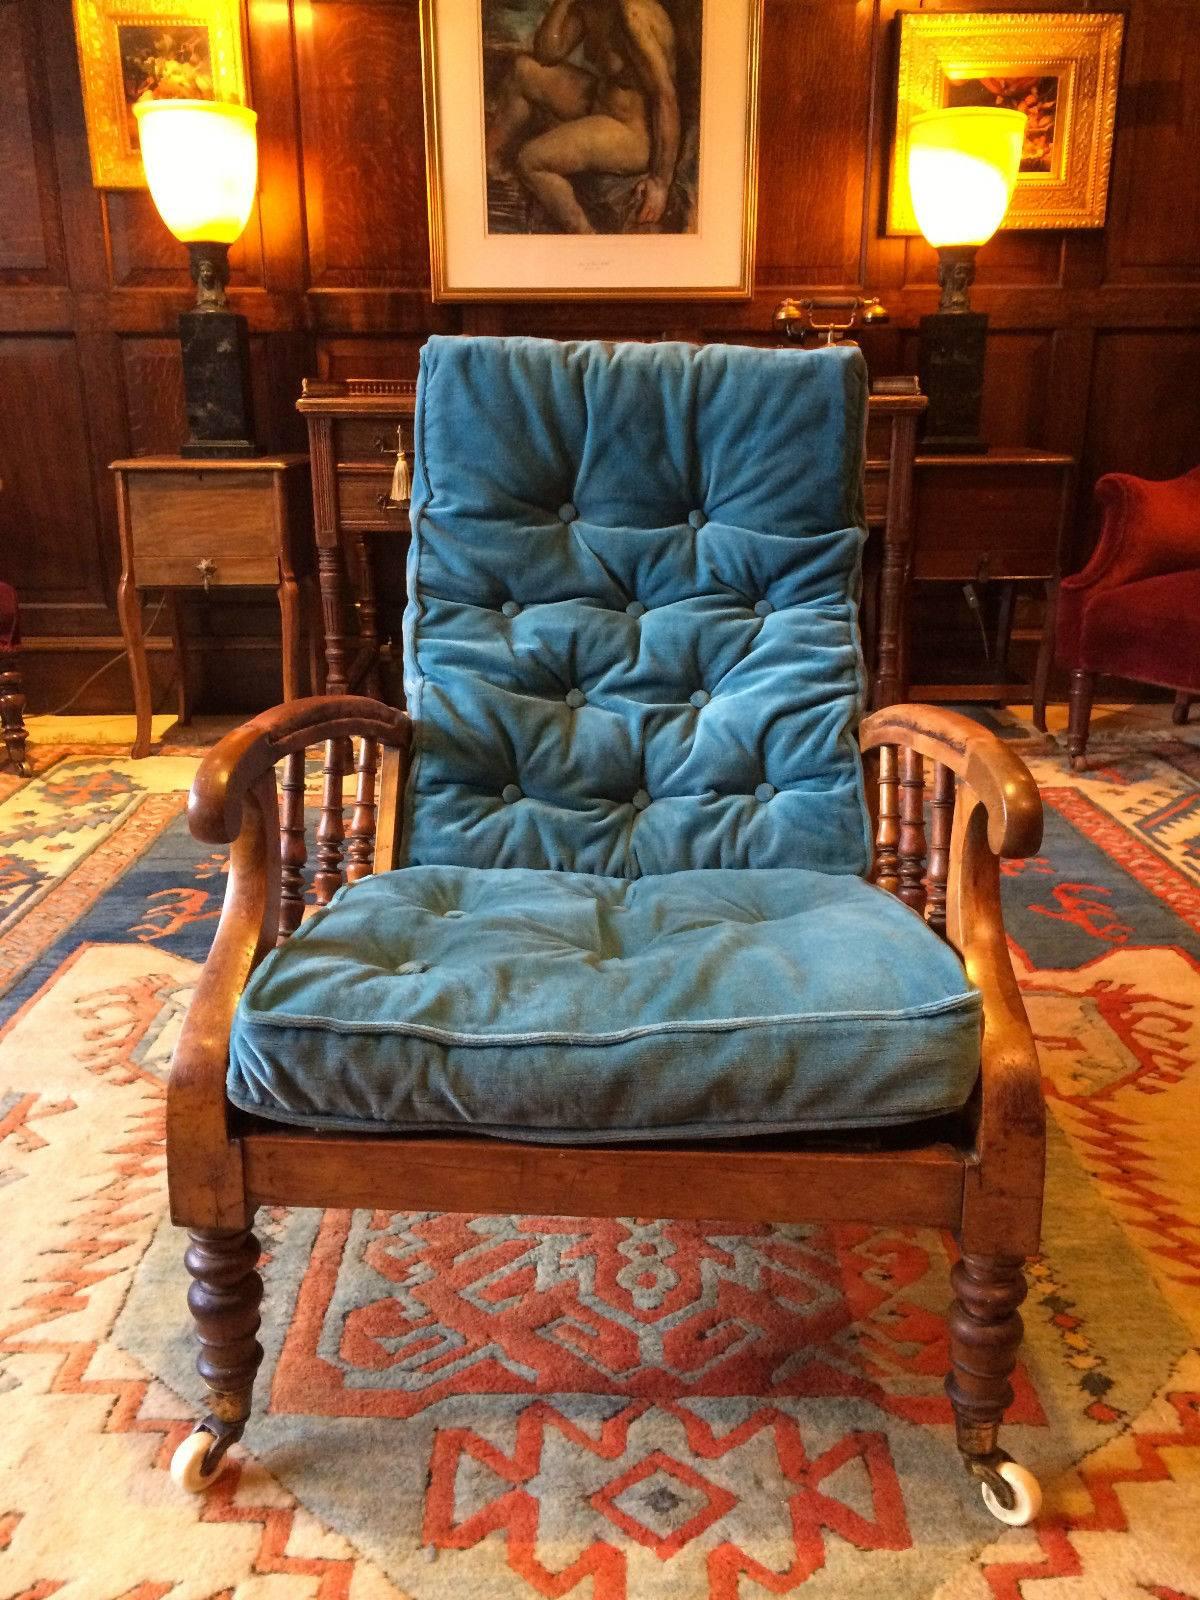 A beautifully elegant with sweeping design early 19th century Regency period Satin Birch reclining armchair dating, circa 1811, spindle back and arms, with four adjustable seating positions with two Blue button back horse hair filled cushions that